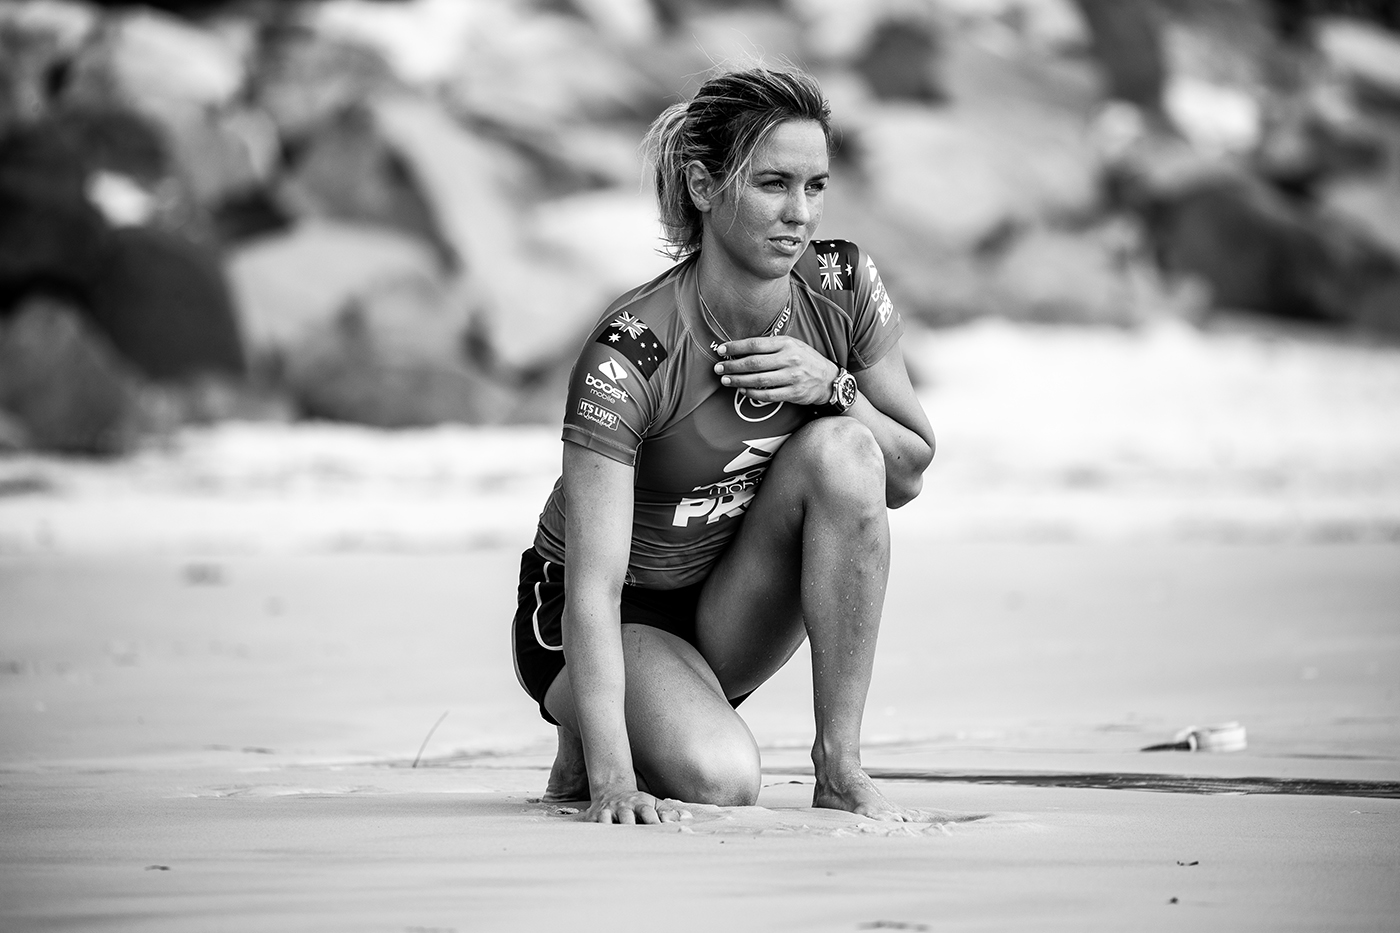 Boost_Mobile_Pro_ Sally_Fitzgibbons 339 by Fran Miller.jpg